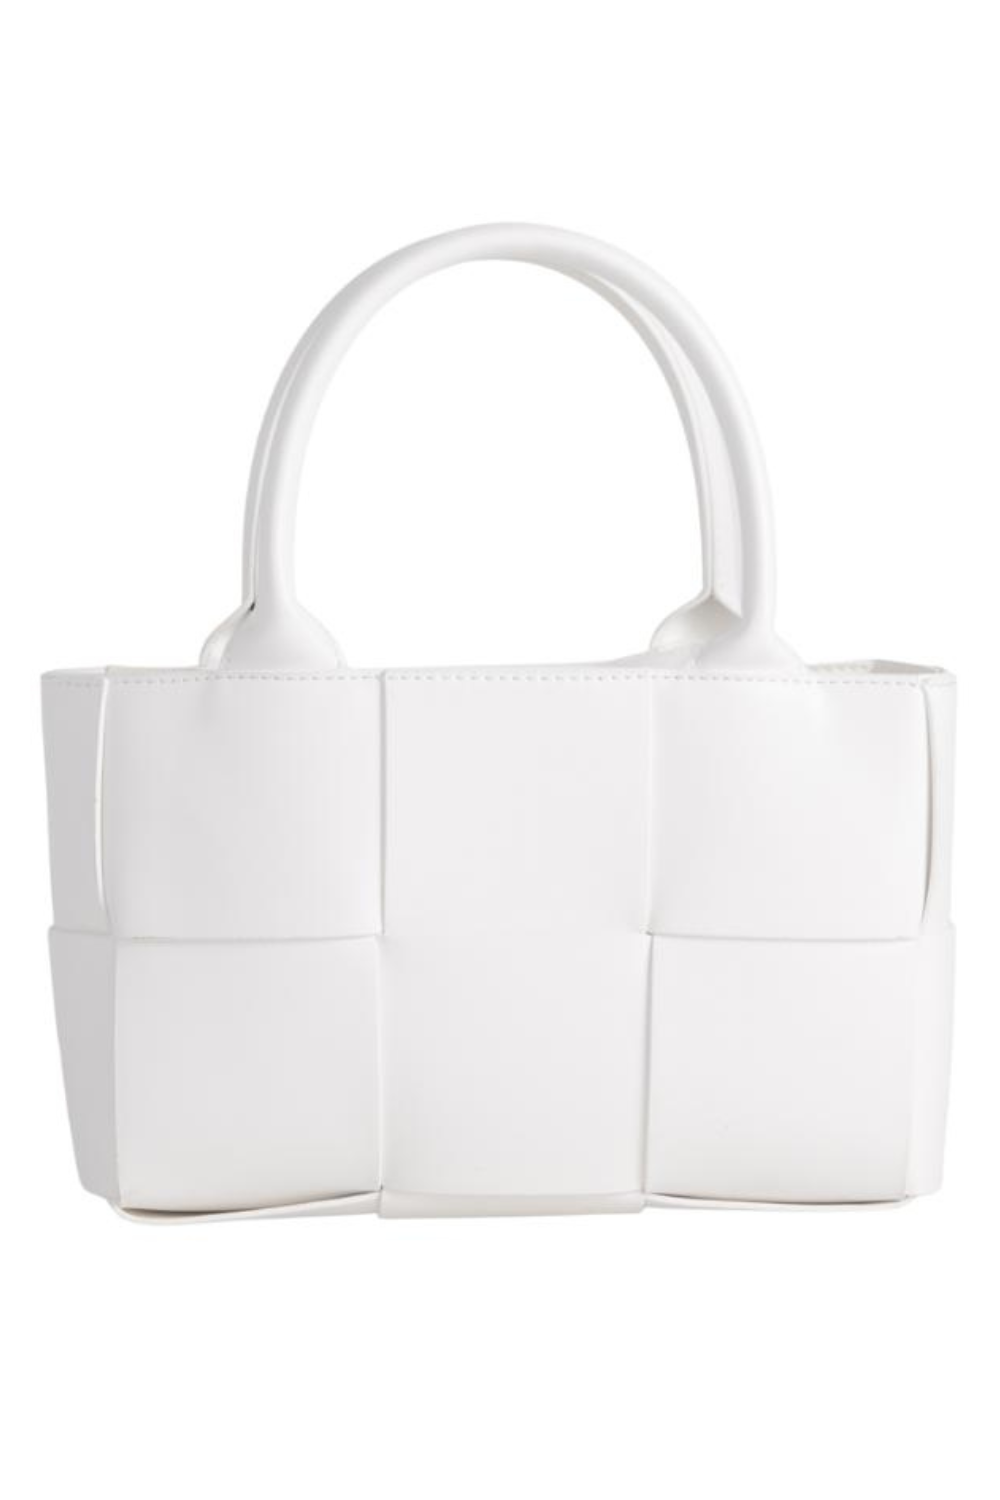 AURORA TOP HANDLE RECTANGLE BAG WITH SQUARE PATTERN IN WHITE FAUX LEATHER